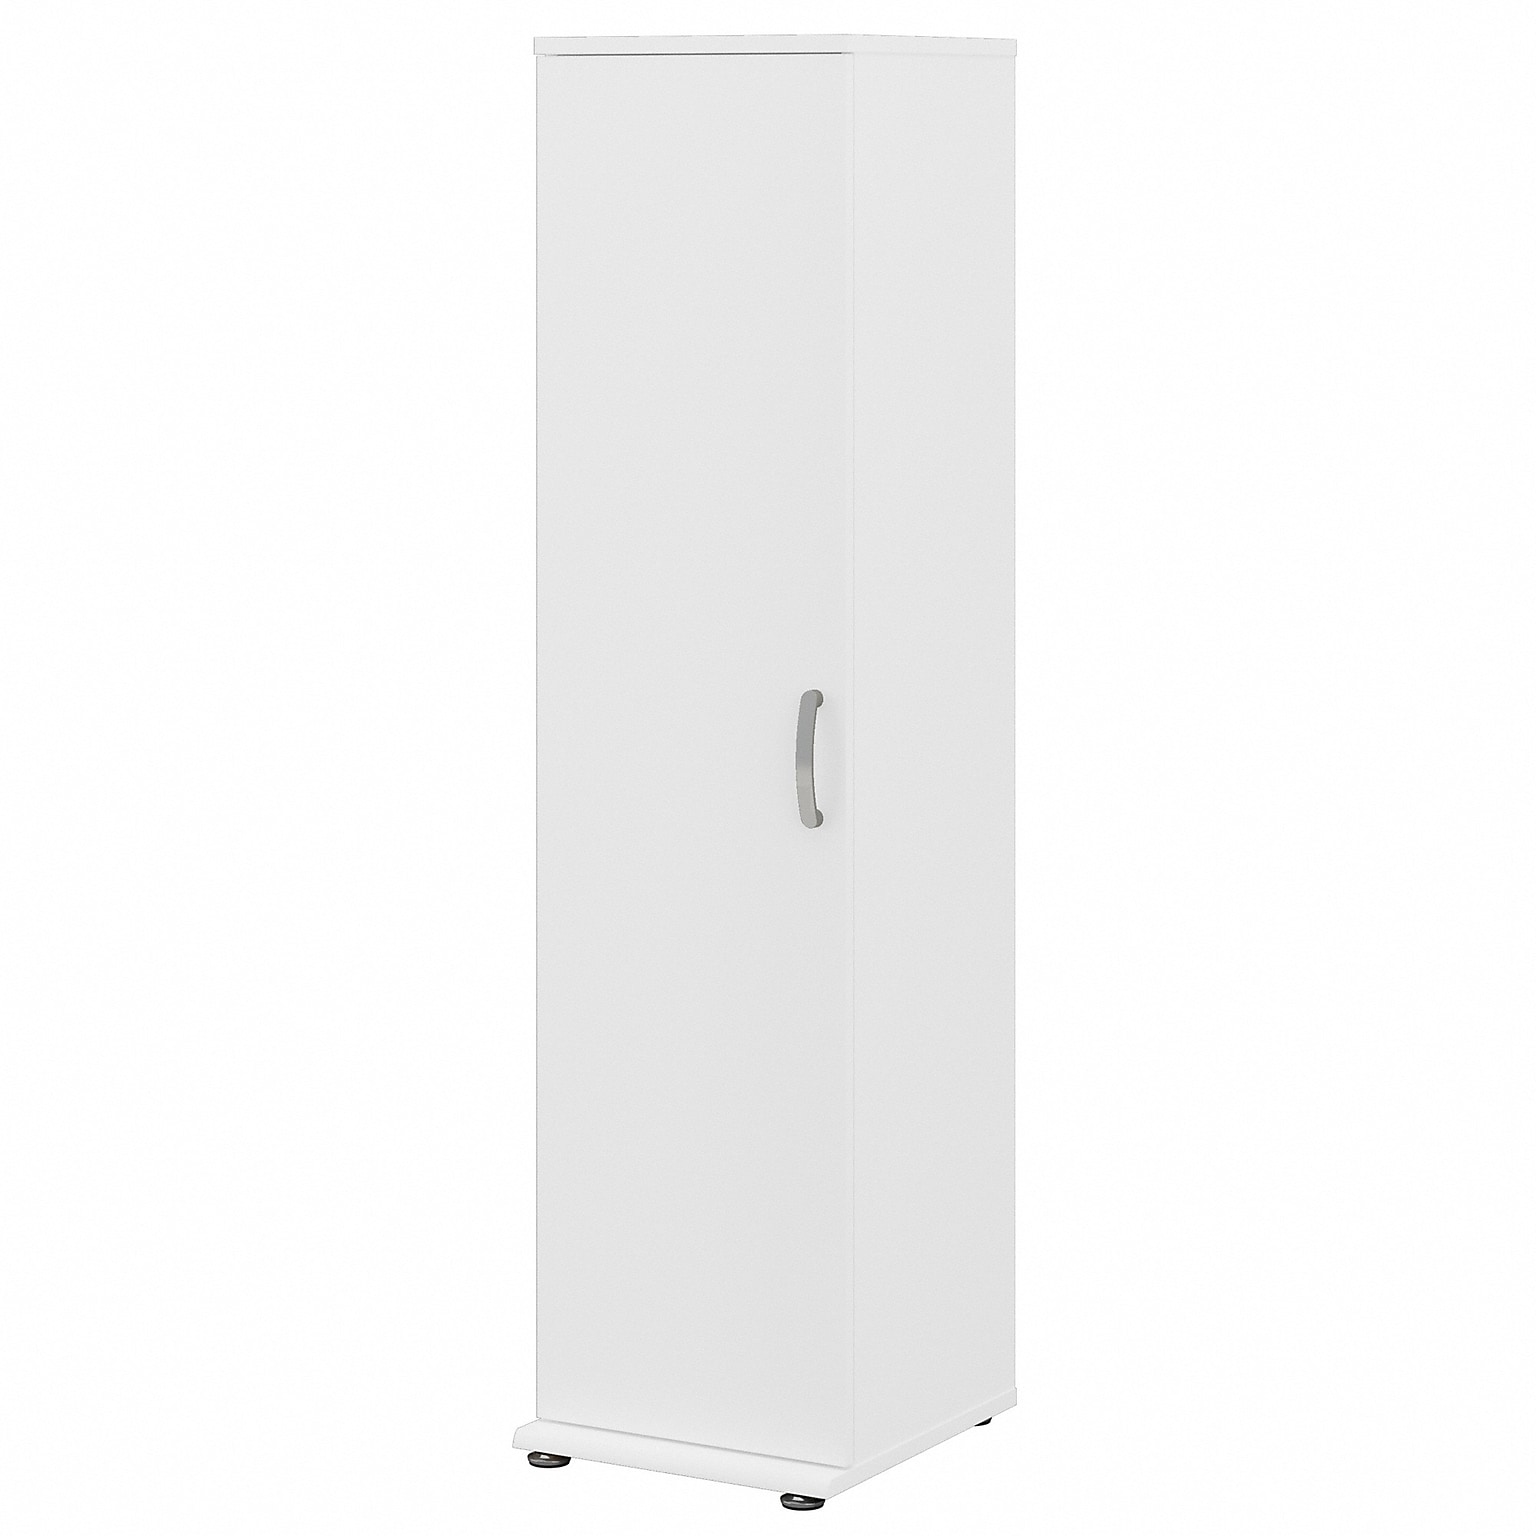 Bush Business Furniture Universal 62 Tall Narrow Storage Cabinet with Door and 3 Shelves, White (UNS116WH)